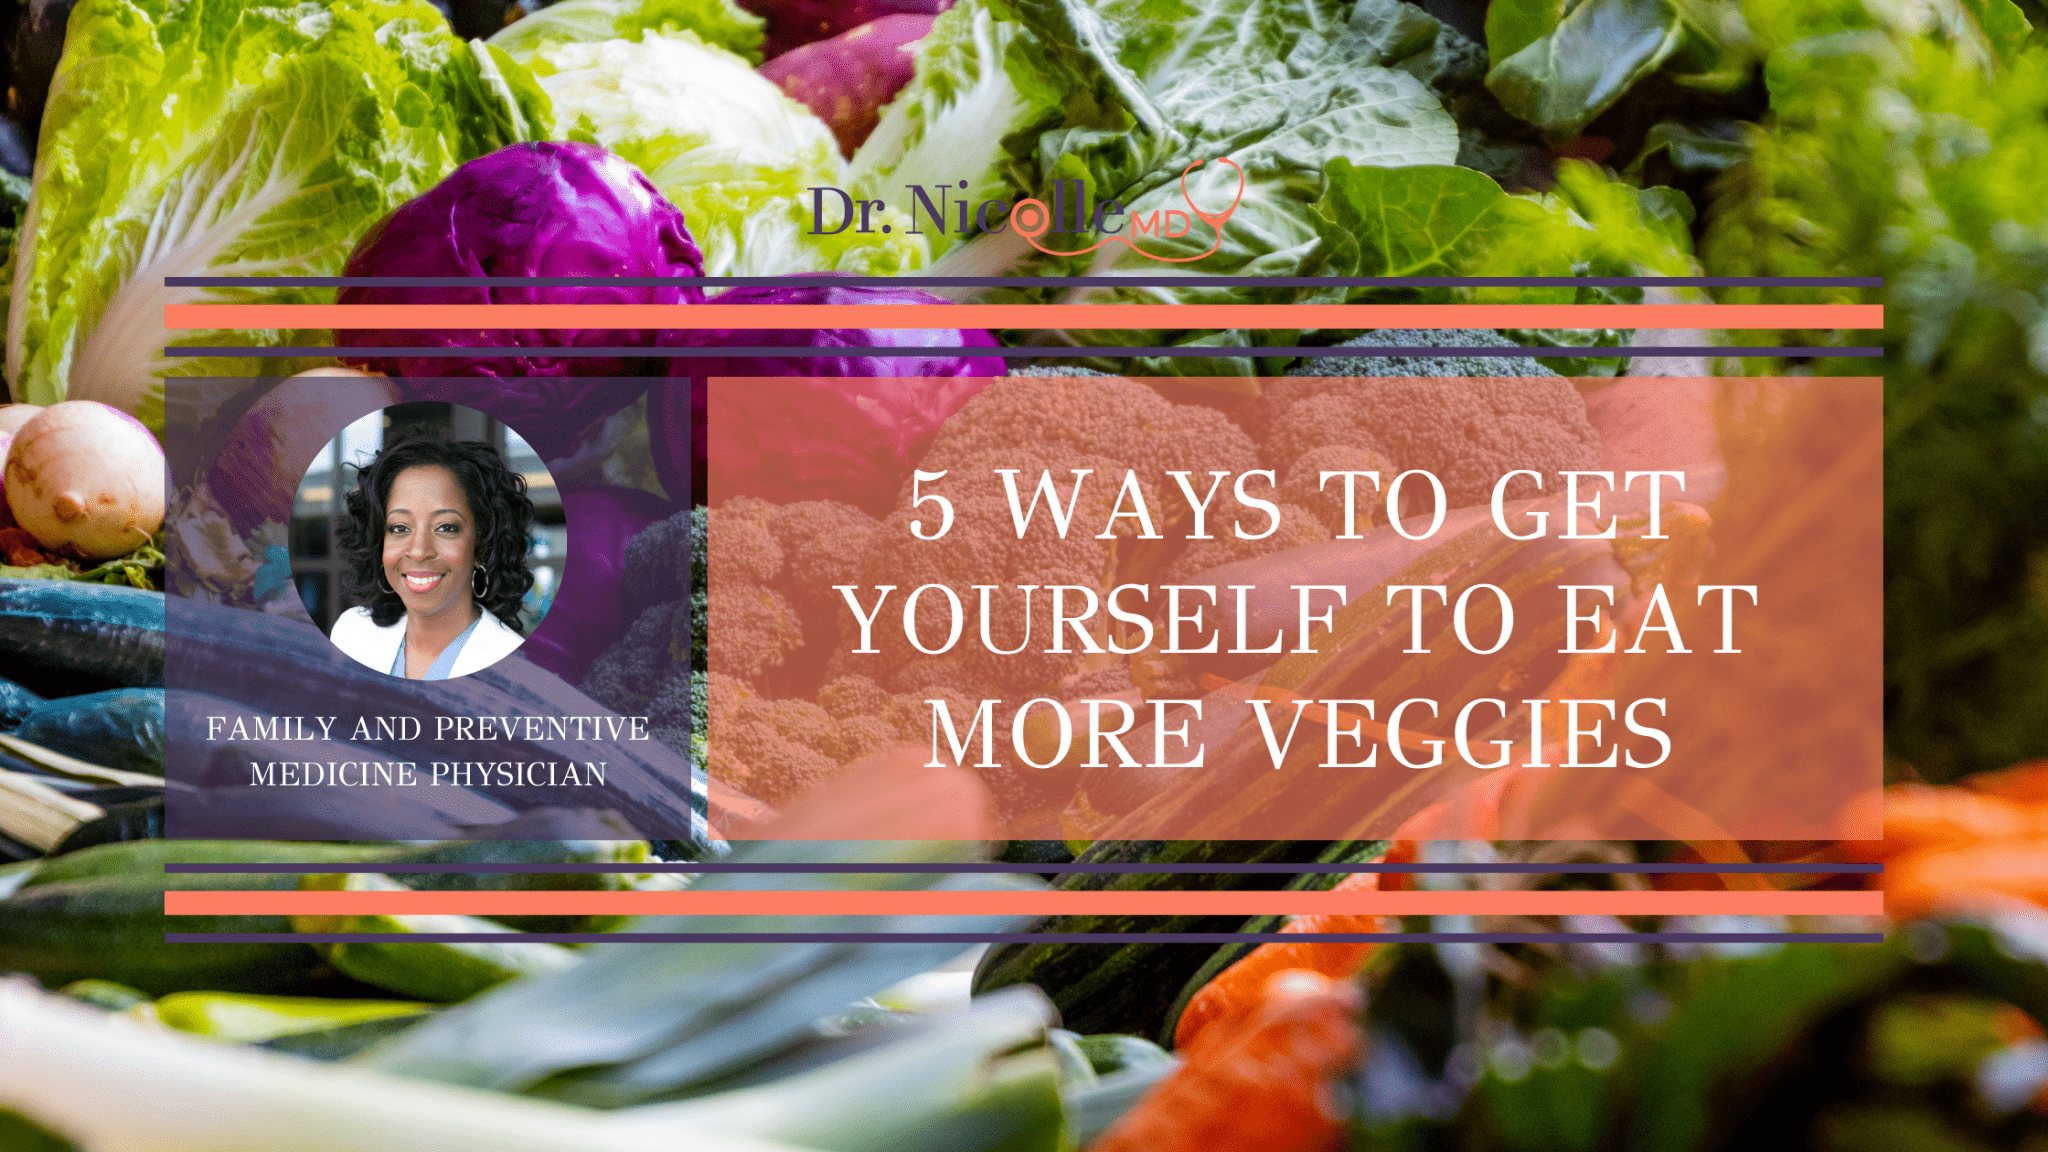 5 Ways to Get Yourself to Eat More Veggies - Dr. Nicolle